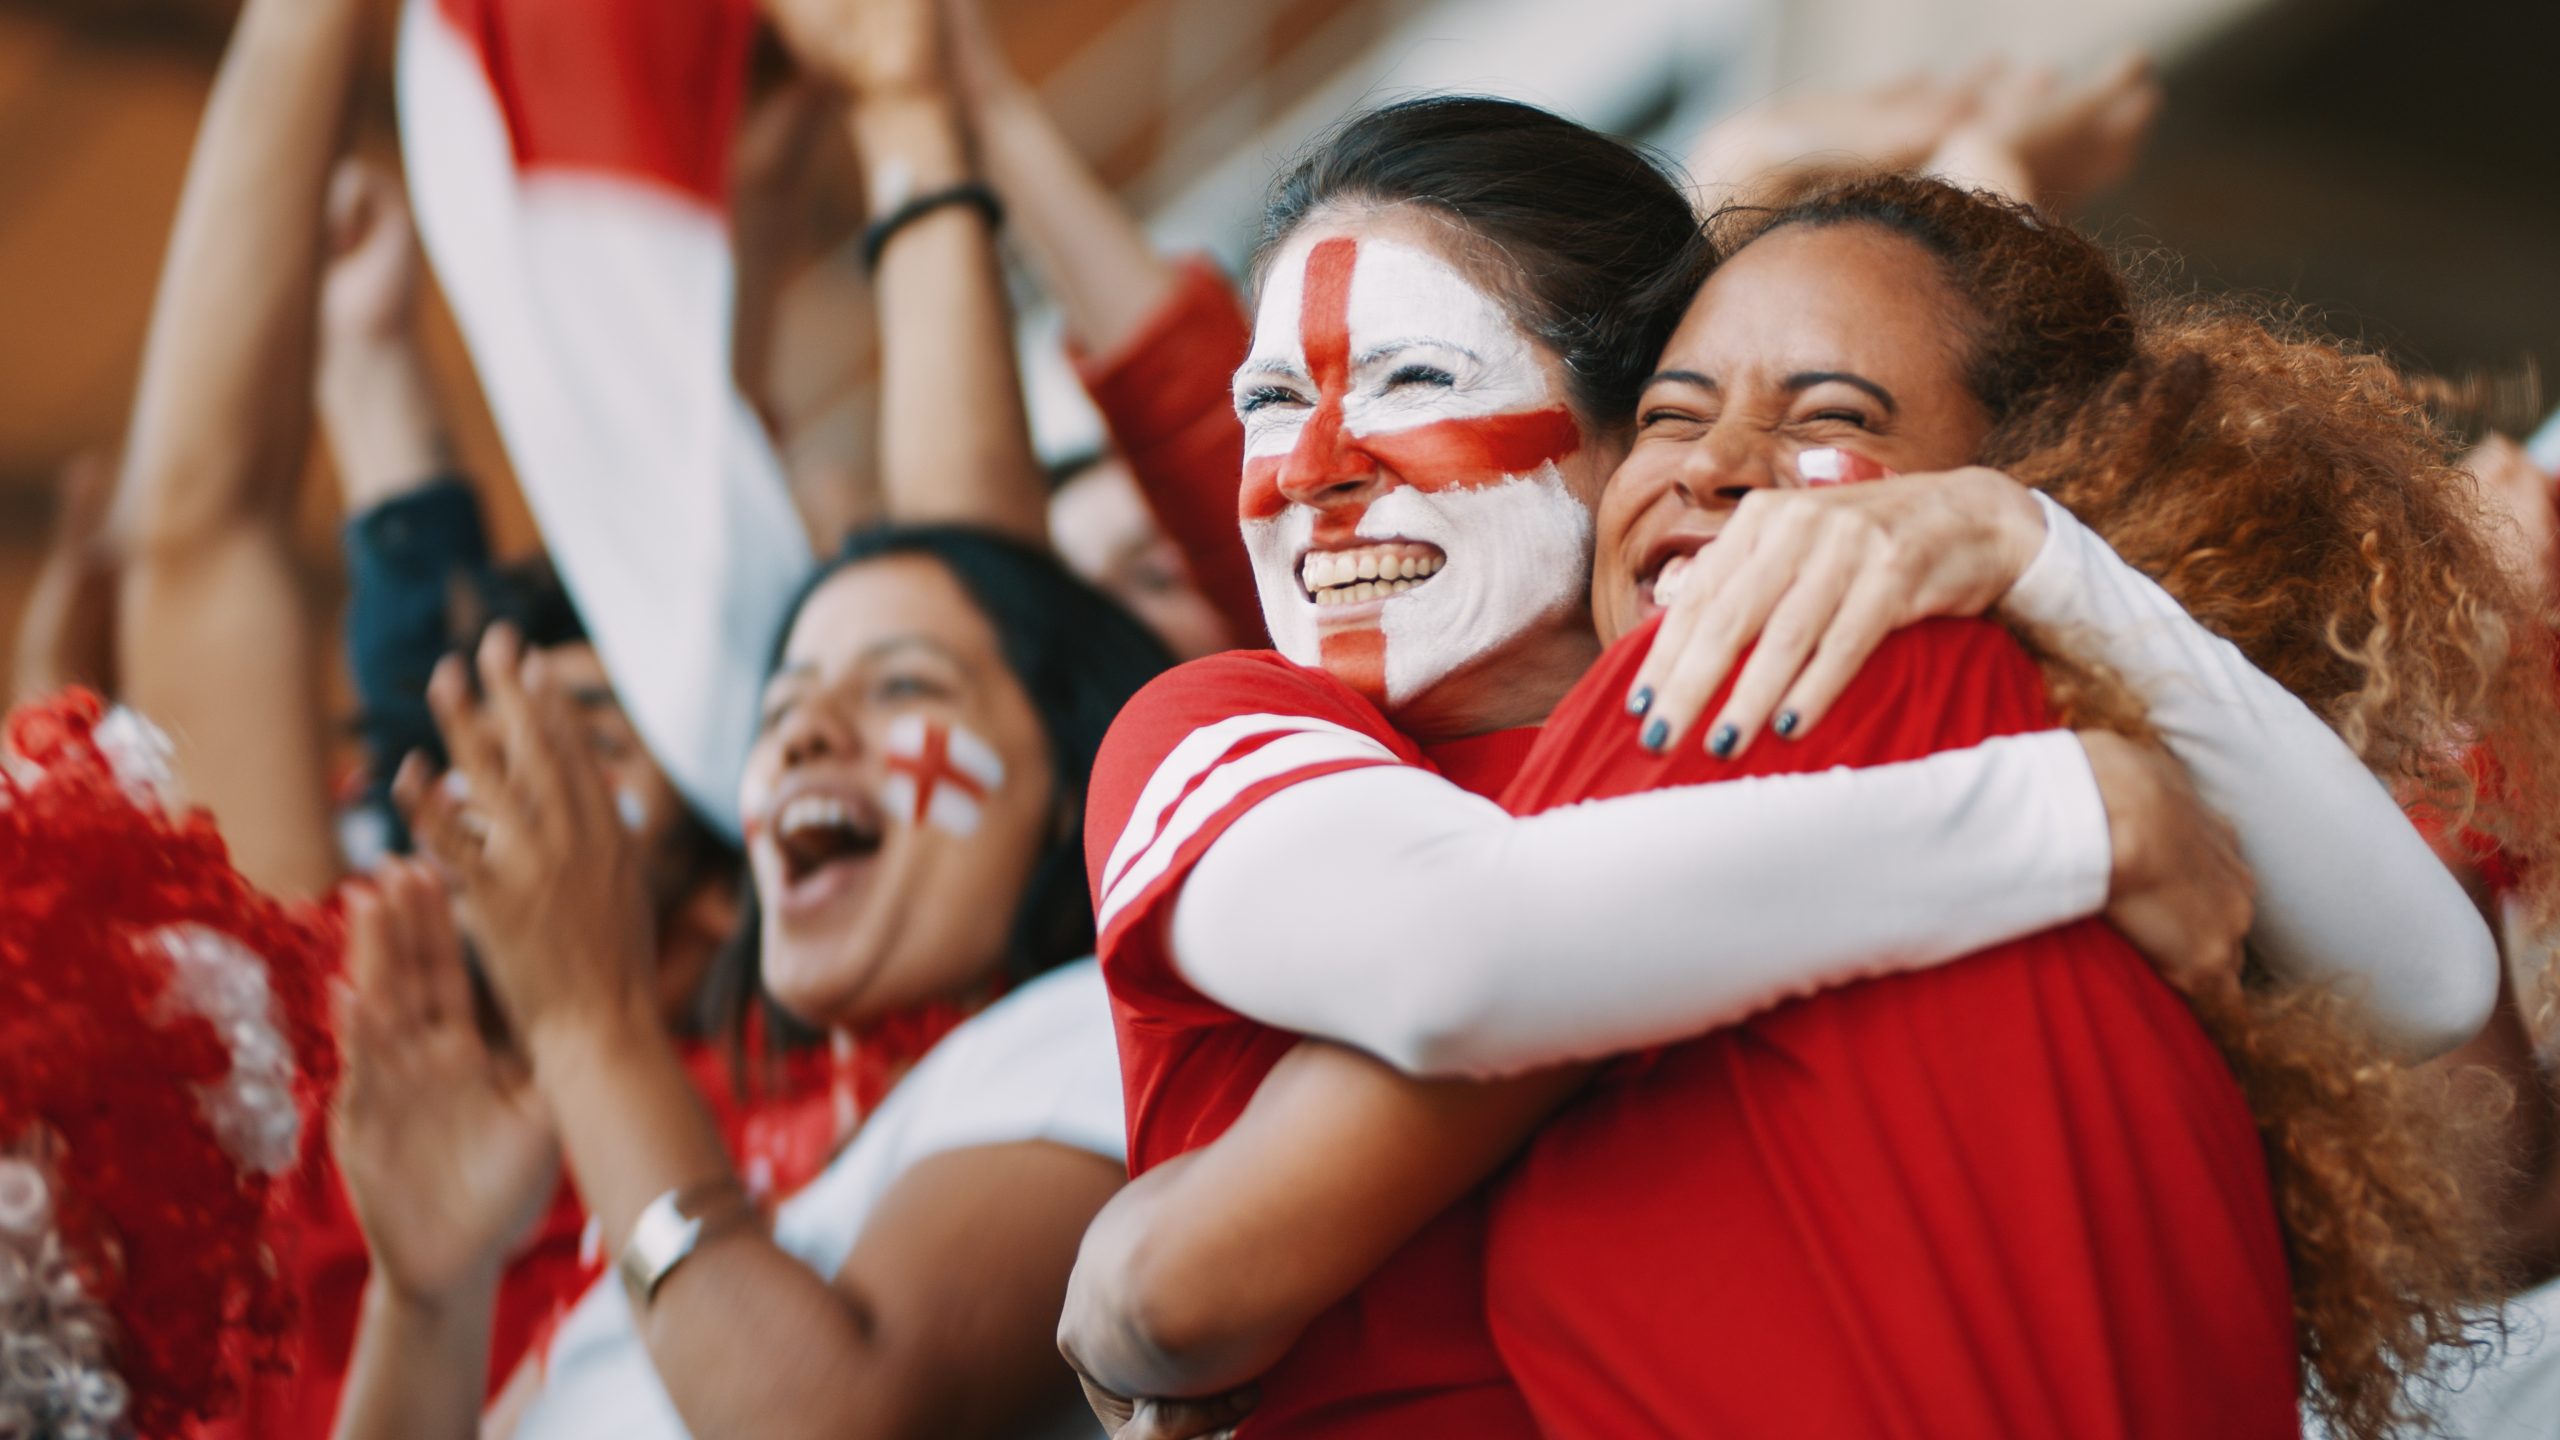 Two female football fans celebrating a goal. One has the England flag painted on her face